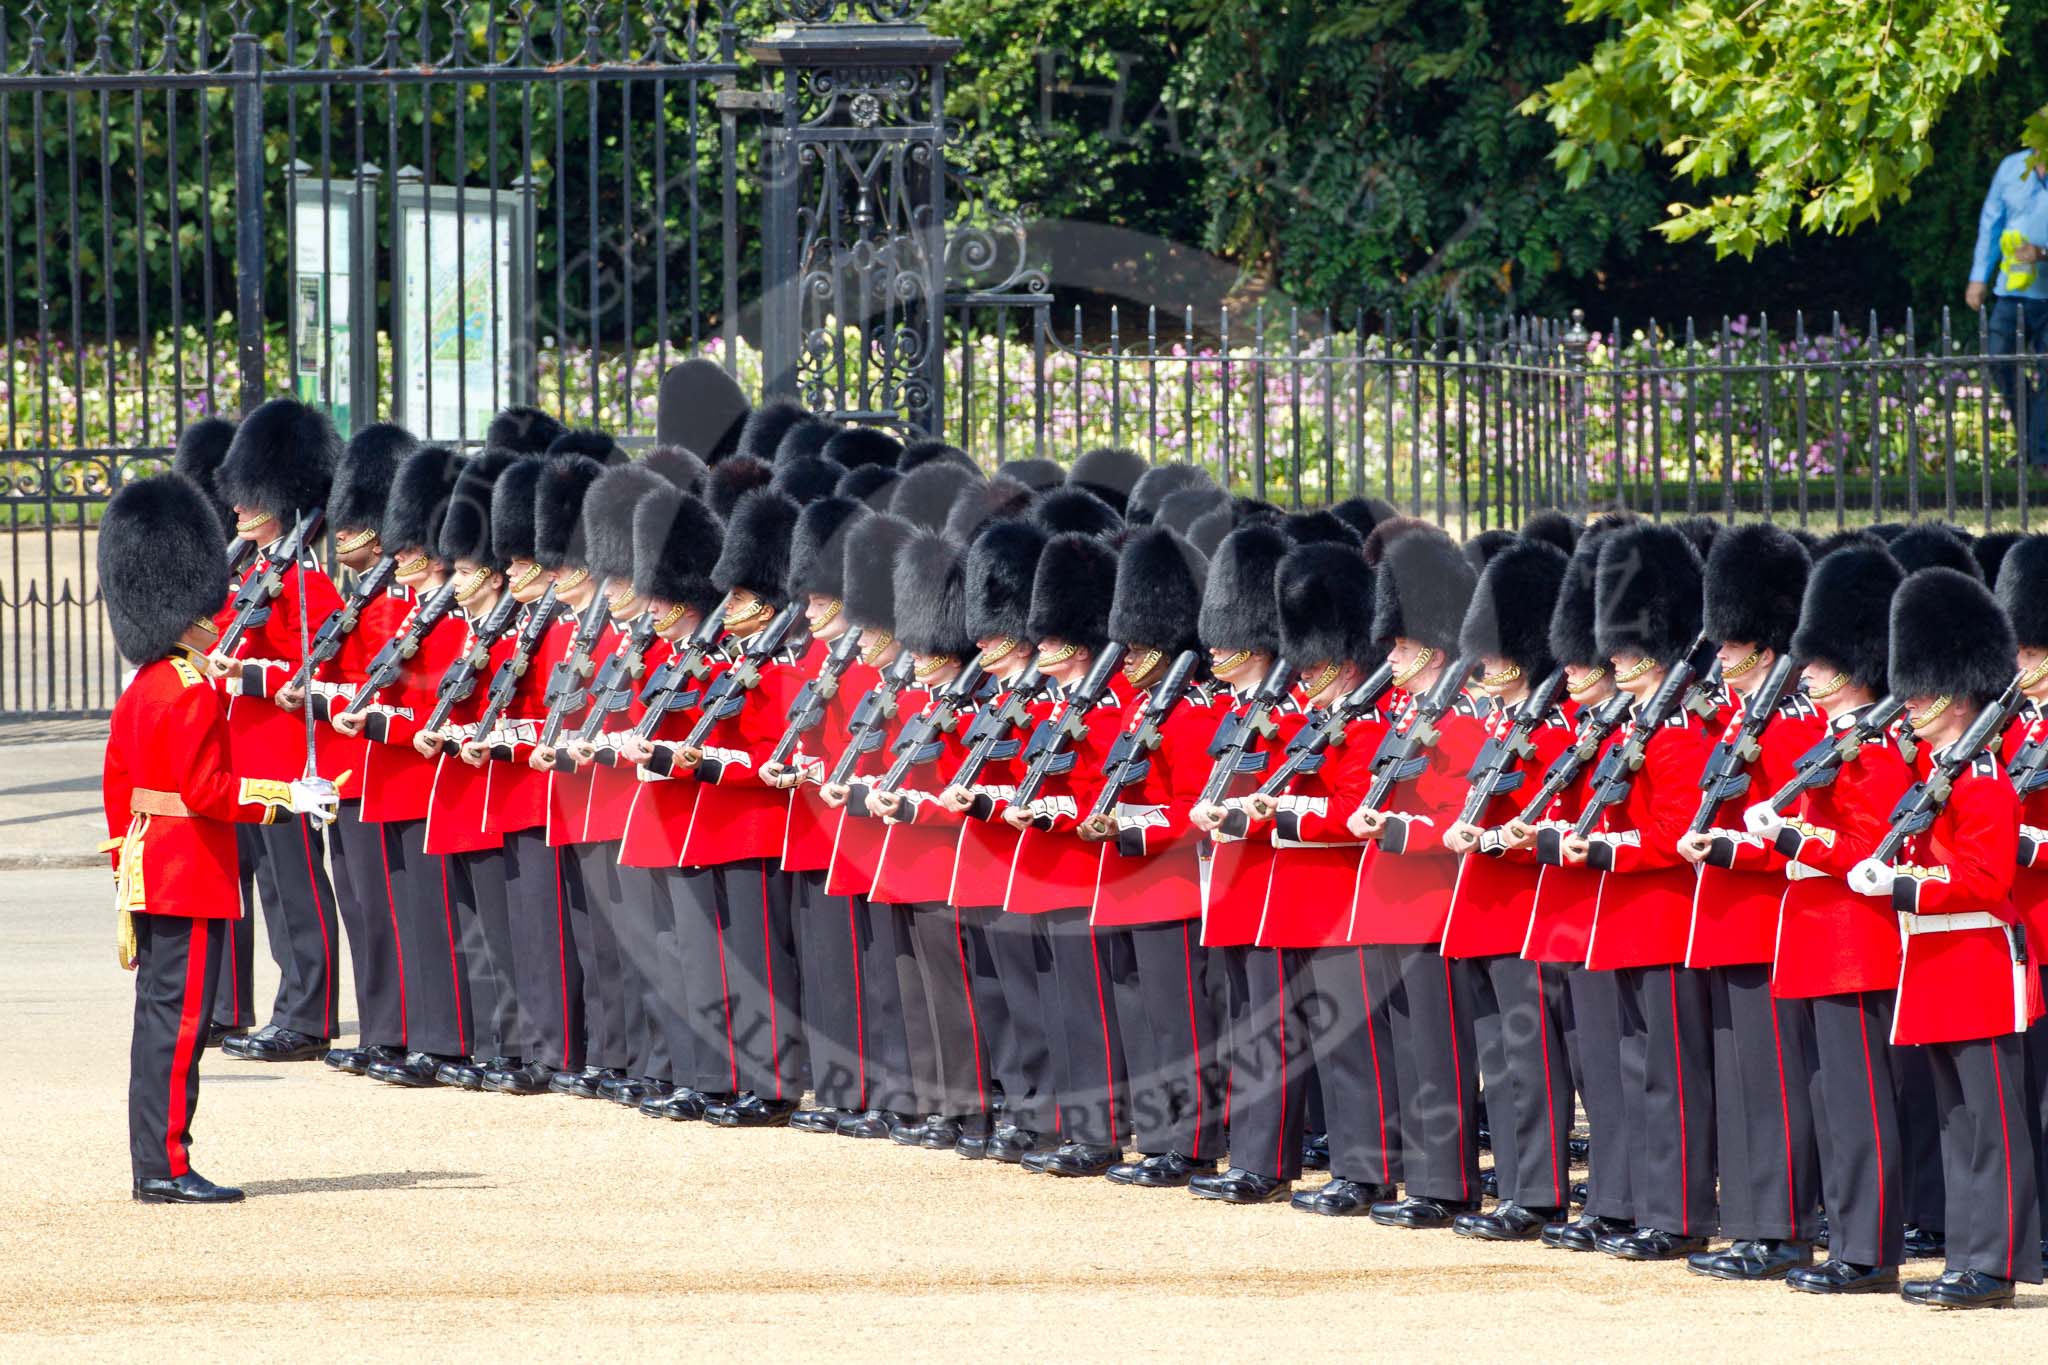 The Colonel's Review 2011: No. 3 Guard, F Company Scots Guards, taking up their place on the parade ground. In the background St. James's Park..
Horse Guards Parade, Westminster,
London SW1,

United Kingdom,
on 04 June 2011 at 10:28, image #28